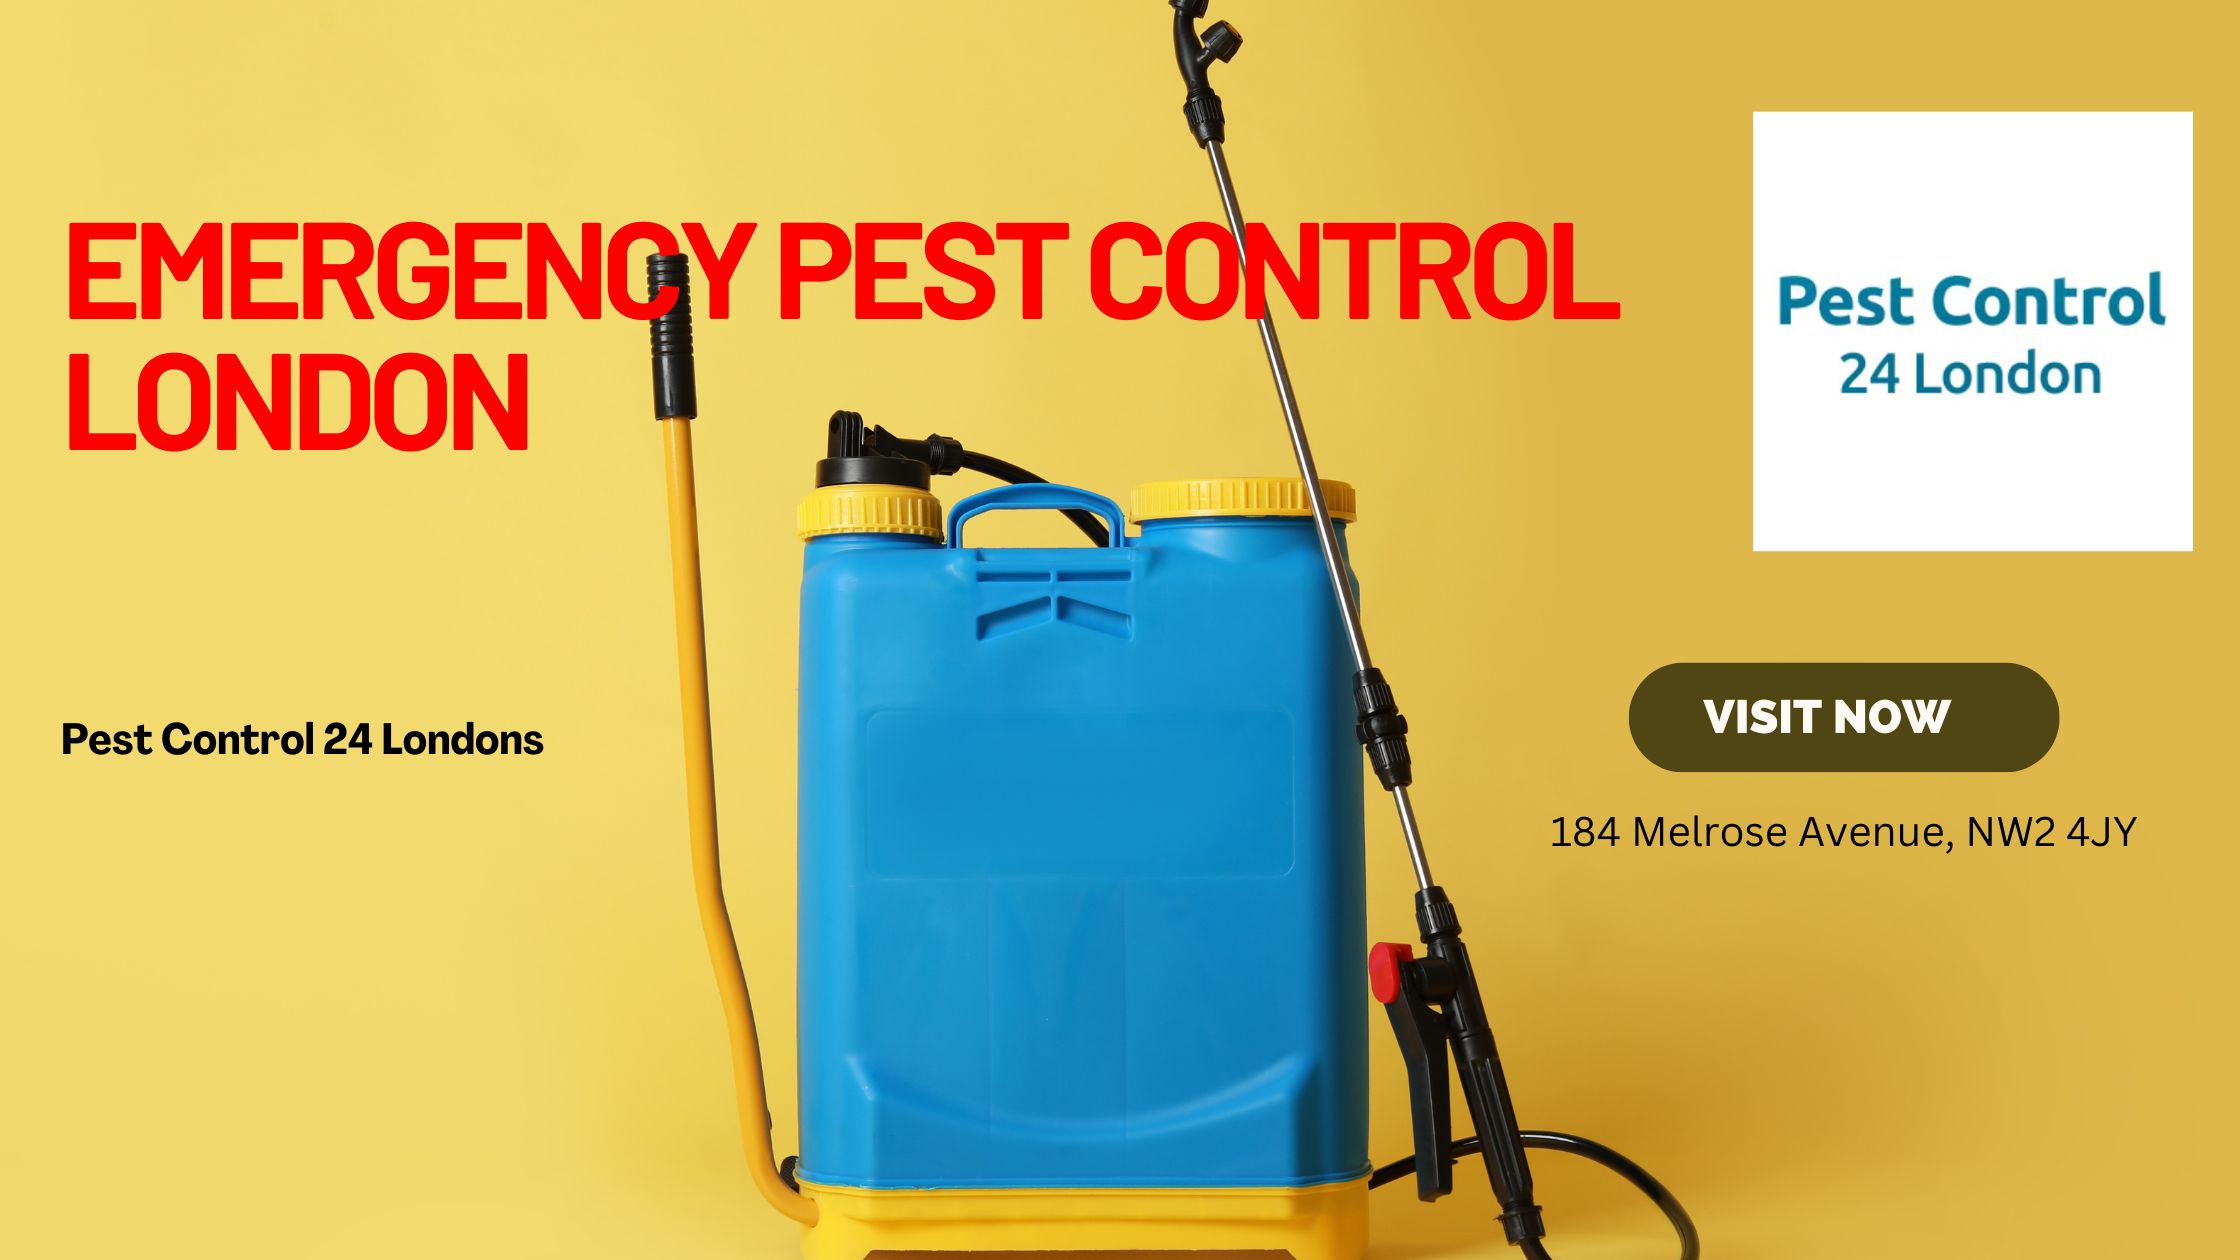 We take care of your pest problems with emergency pest control in London! - Routineblog.com